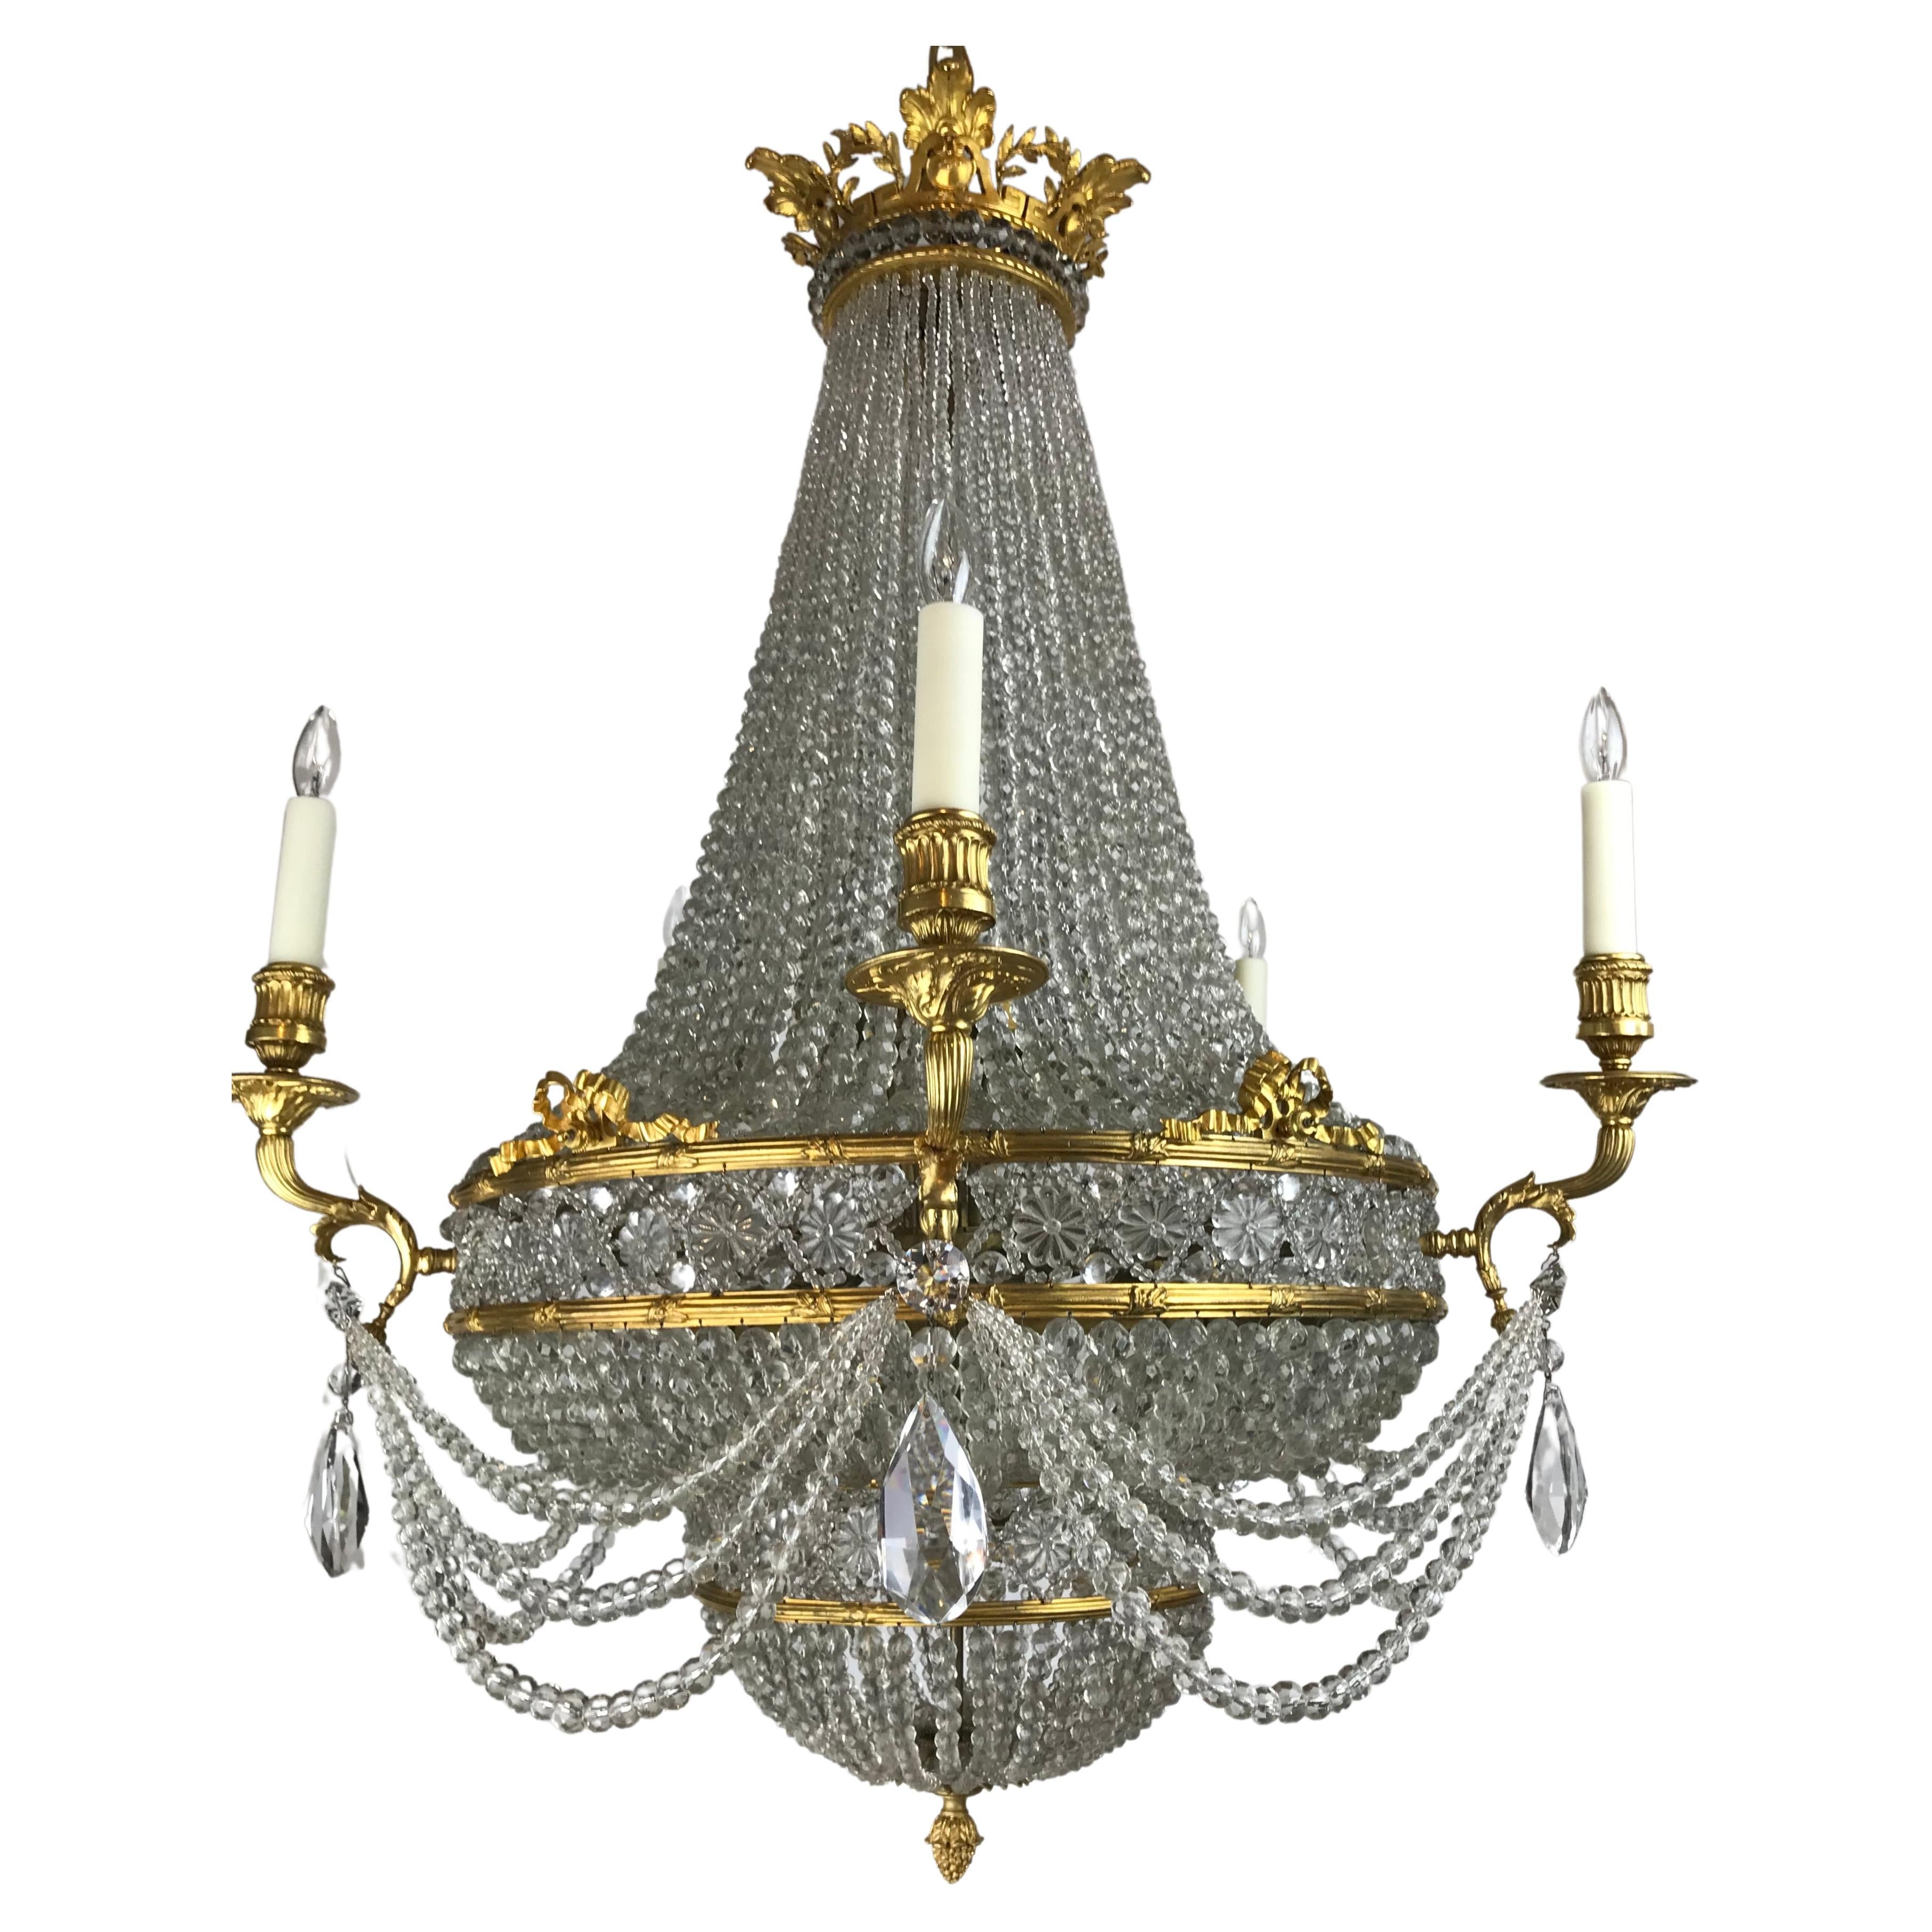 Large Signed E. F. Caldwell Bronze and Crystal Empire Style Chandelier